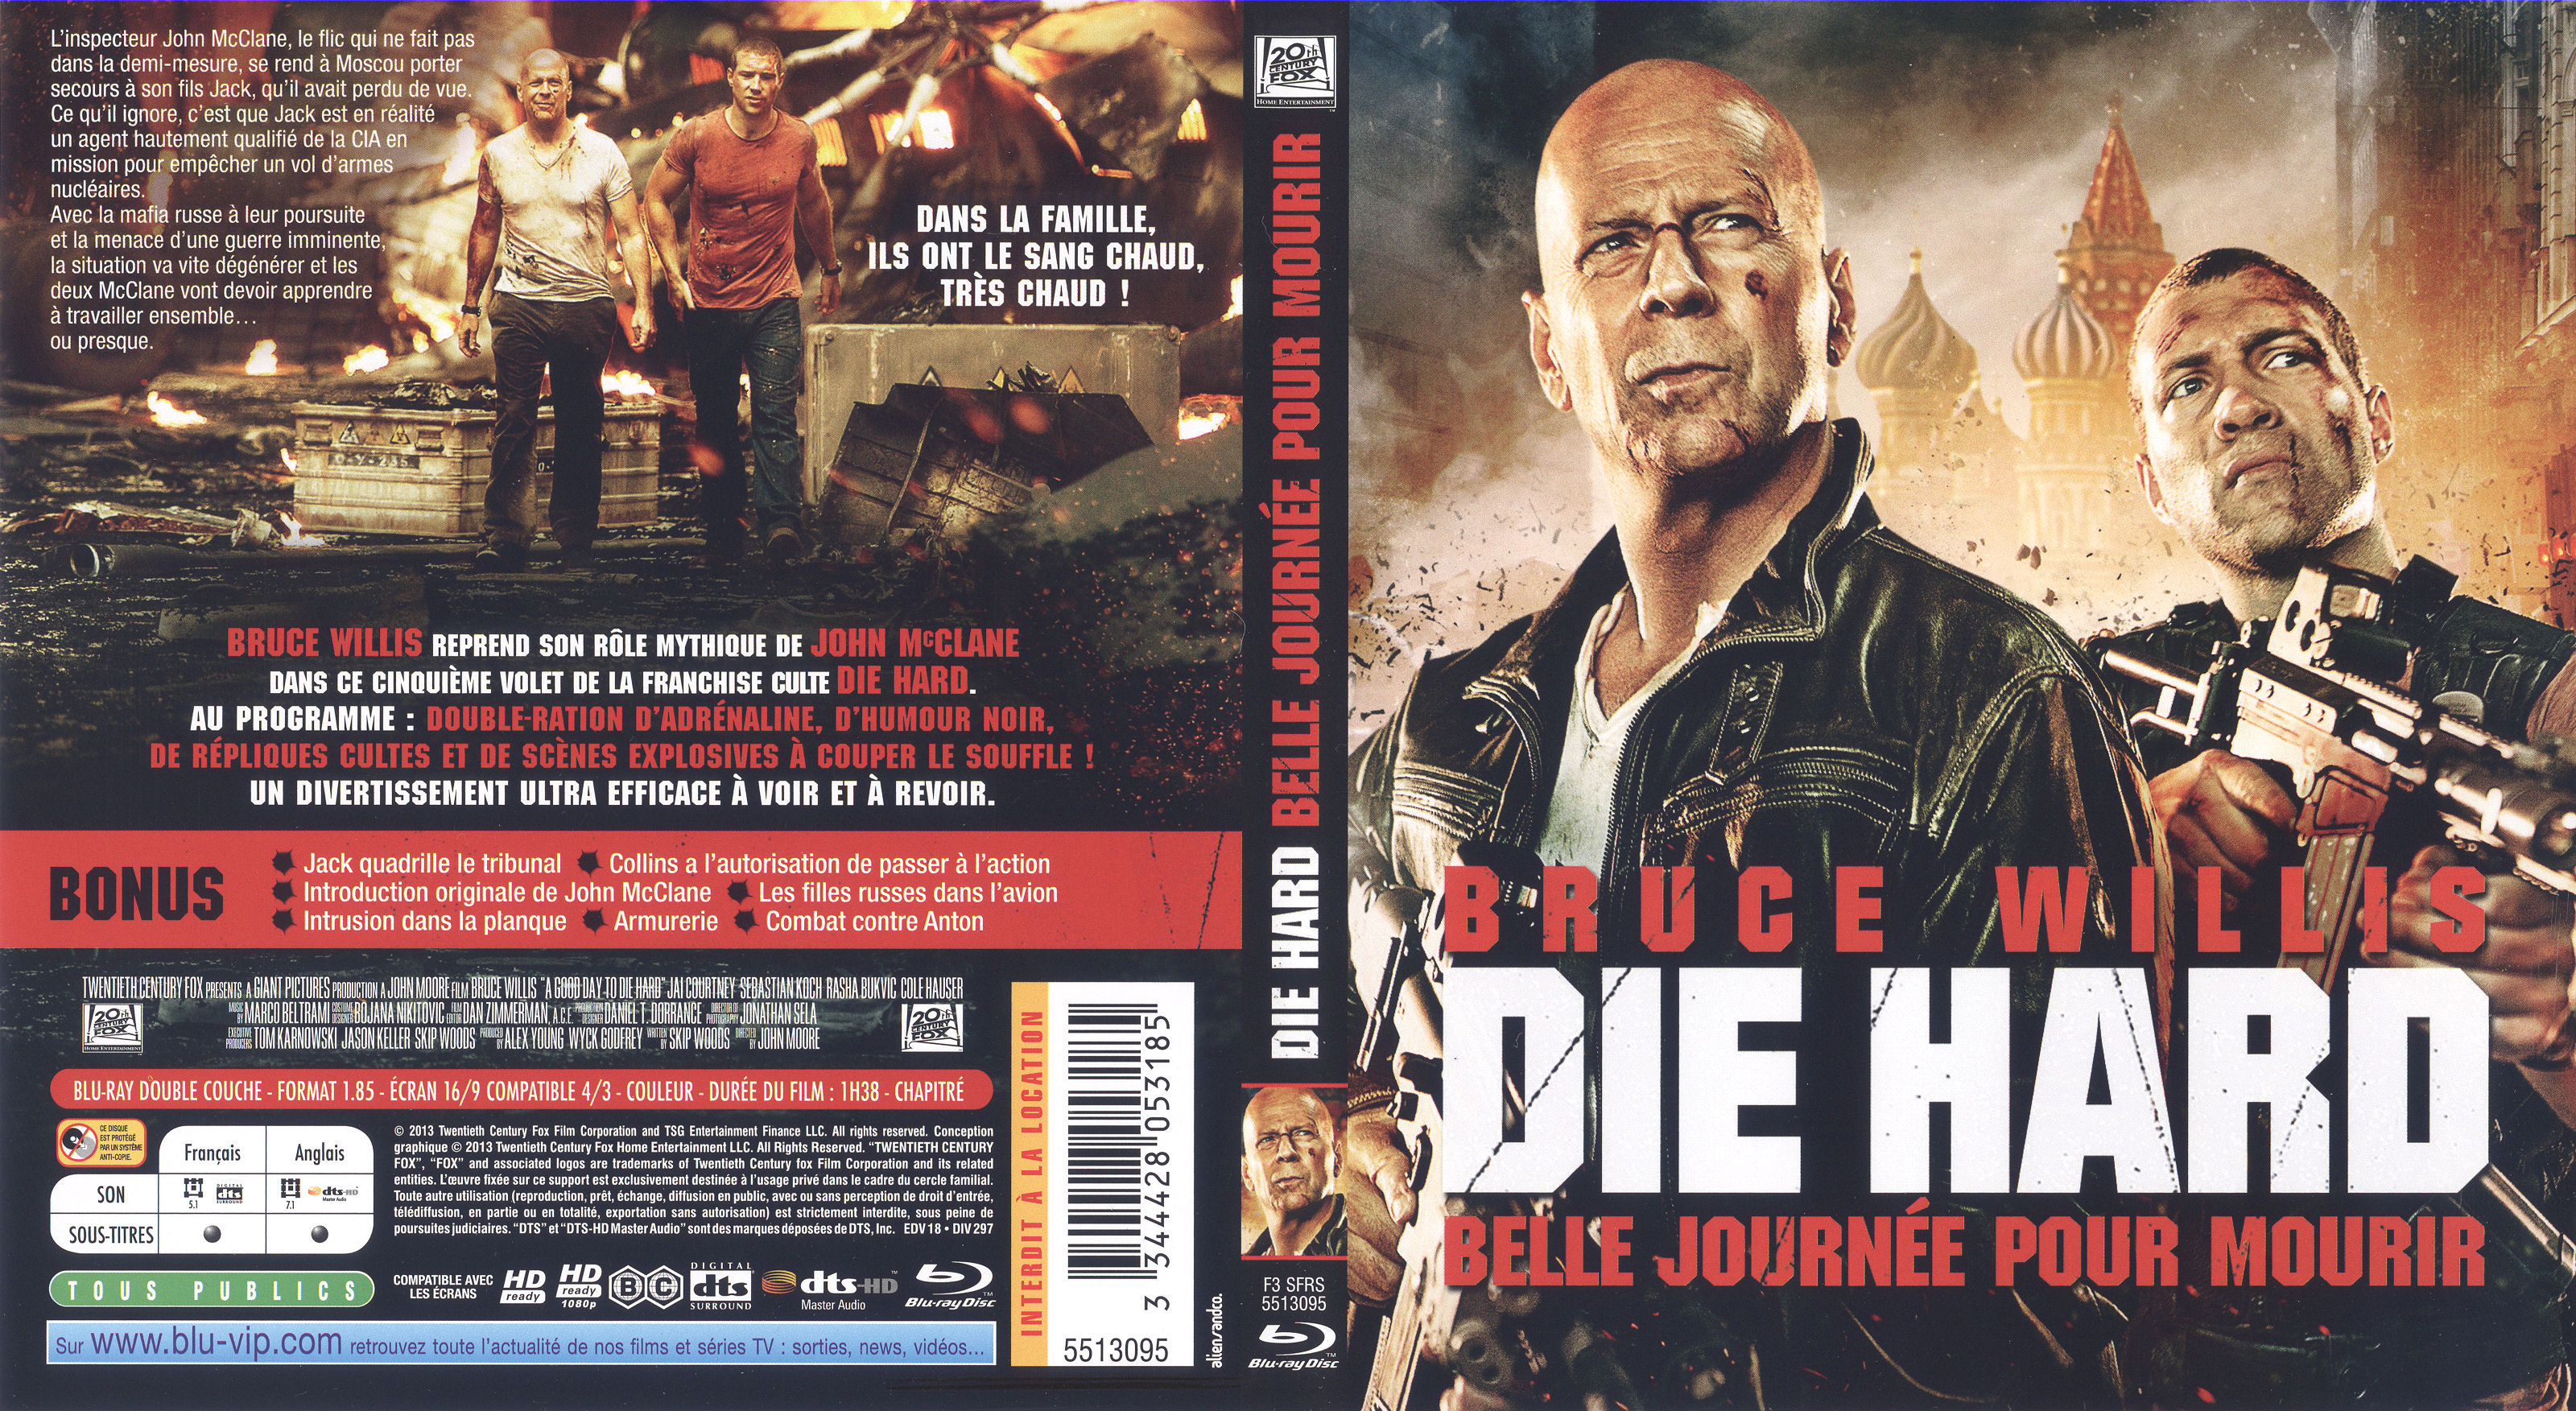 Jaquette DVD Die Hard Belle journe pour mourir (BLU-RAY)